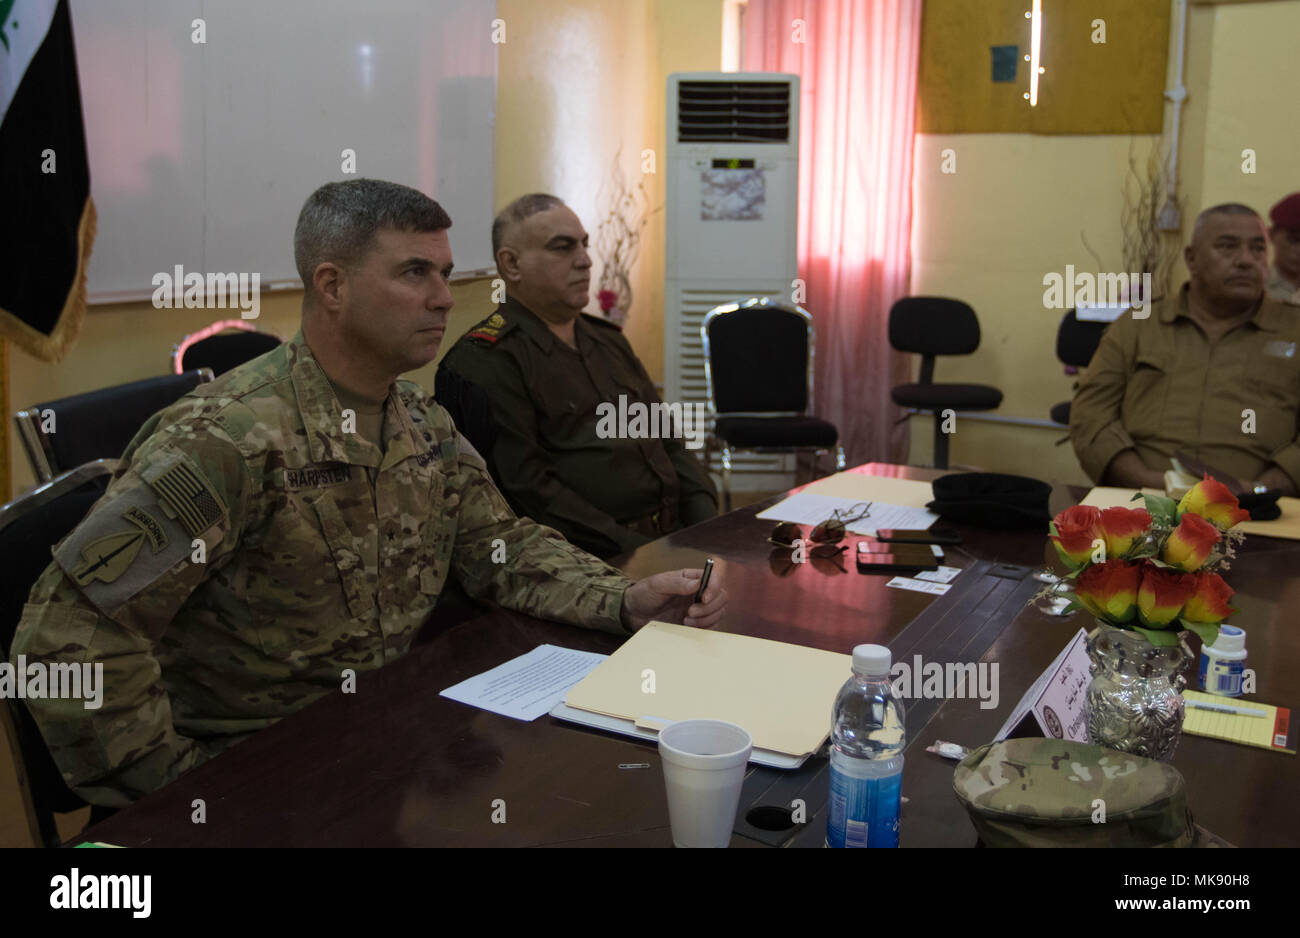 CAMP TAJI, Iraq (Nov. 7, 2017) – Brig. Gen. Christopher Sharpsten, CJ4 with the Combined Joint Task Force and Staff Maj. Gen. Hassan Hillel Al-Maliki, director of Iraqi maintenance with the Iraqi forces, leads the logistics symposium. Iraqi and U.S. forces met and discussed upcoming operations by sharing intelligence, developing security strategies and targeting plans. The symposium promotes interoperability between the countries. (U.S. Army image edited by Sgt. Jaccob Hearn) Stock Photo